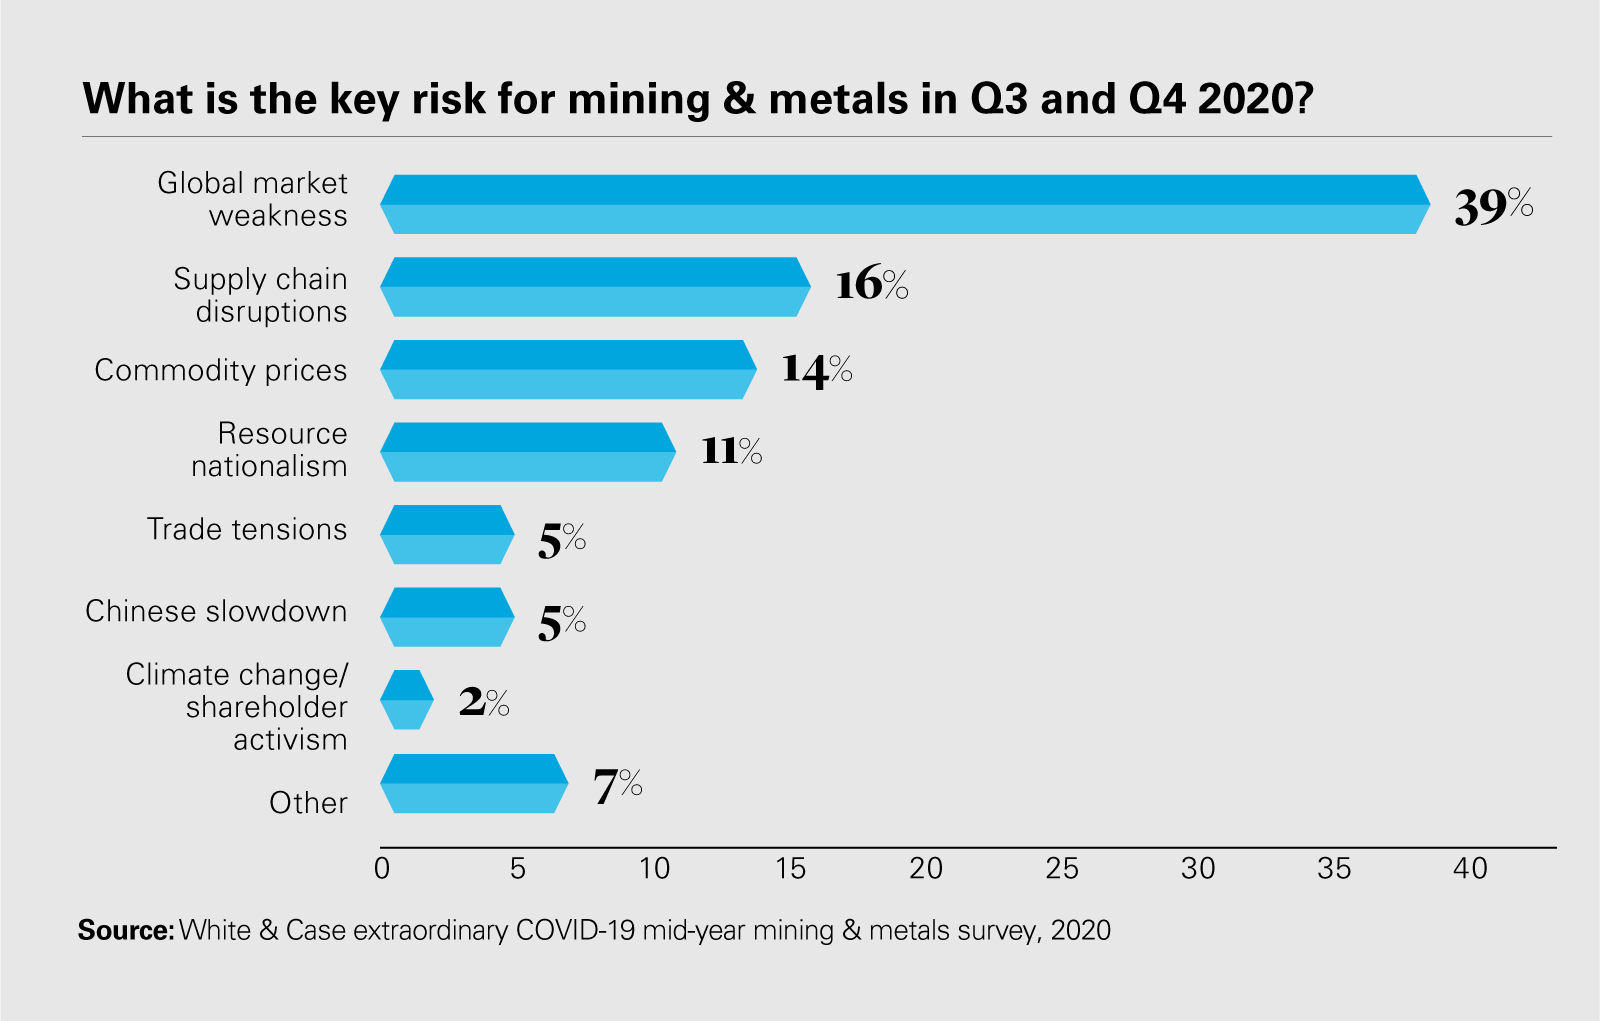 What is the key risk for mining & metals in Q3 and Q4 2020?